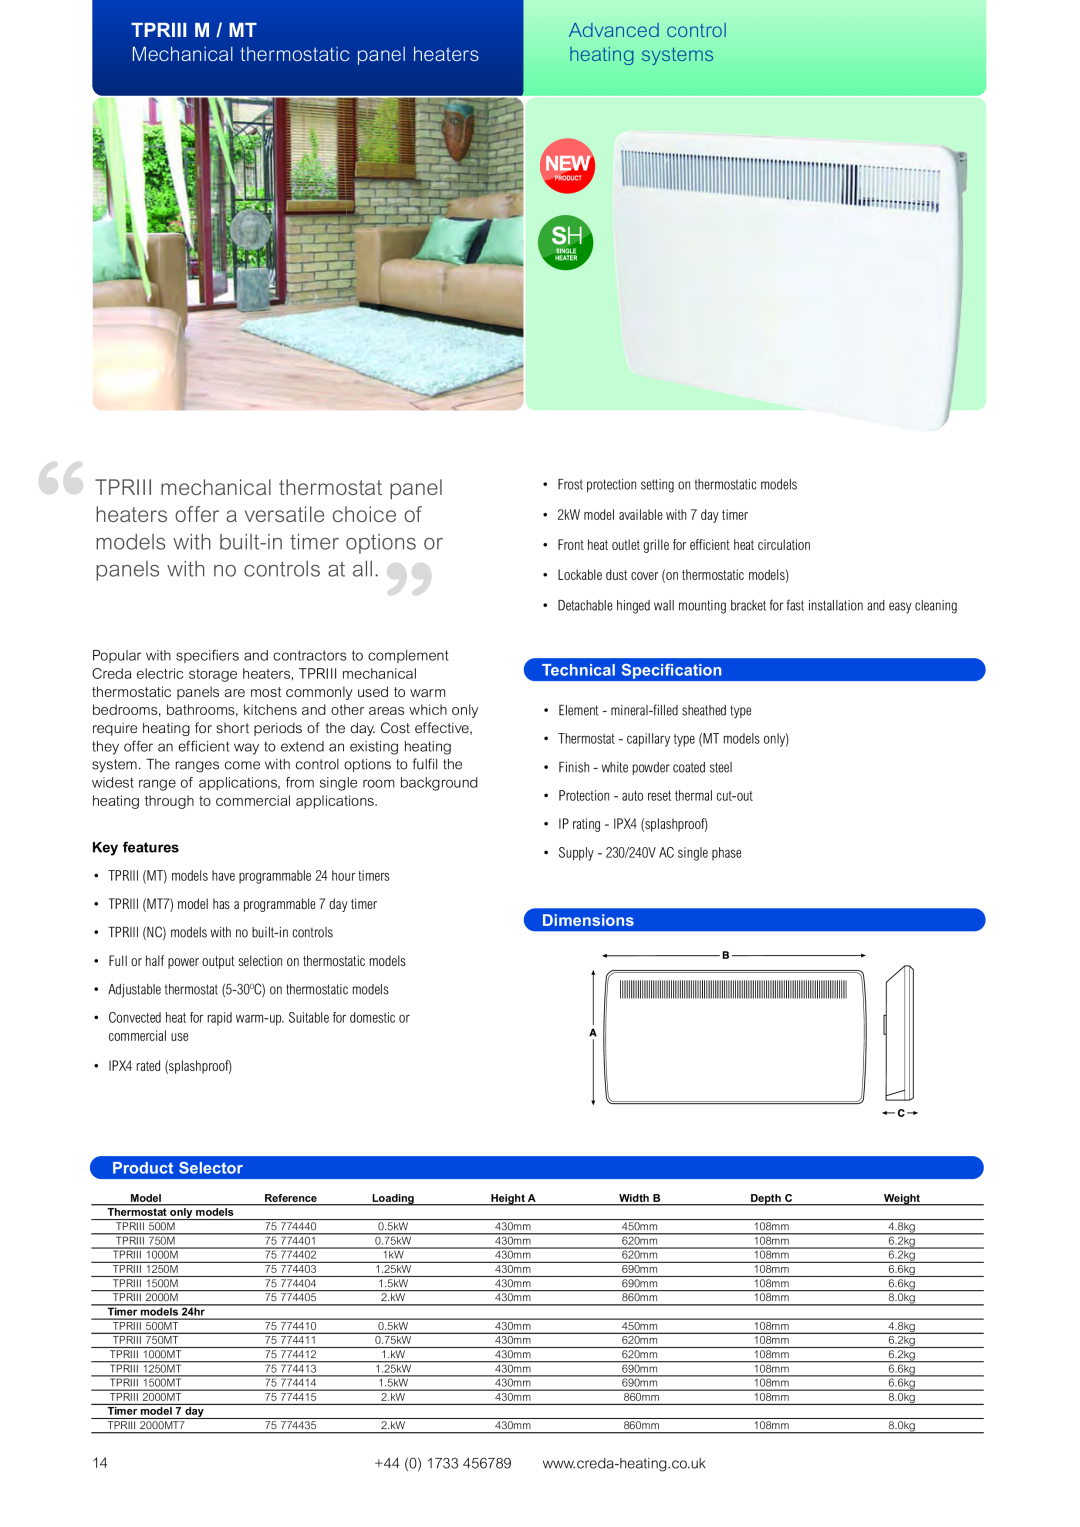 Creda Advanced Control Heating Systems manual Tpriii M / Mt, Mechanical thermostatic panel heaters, Technical Specification 